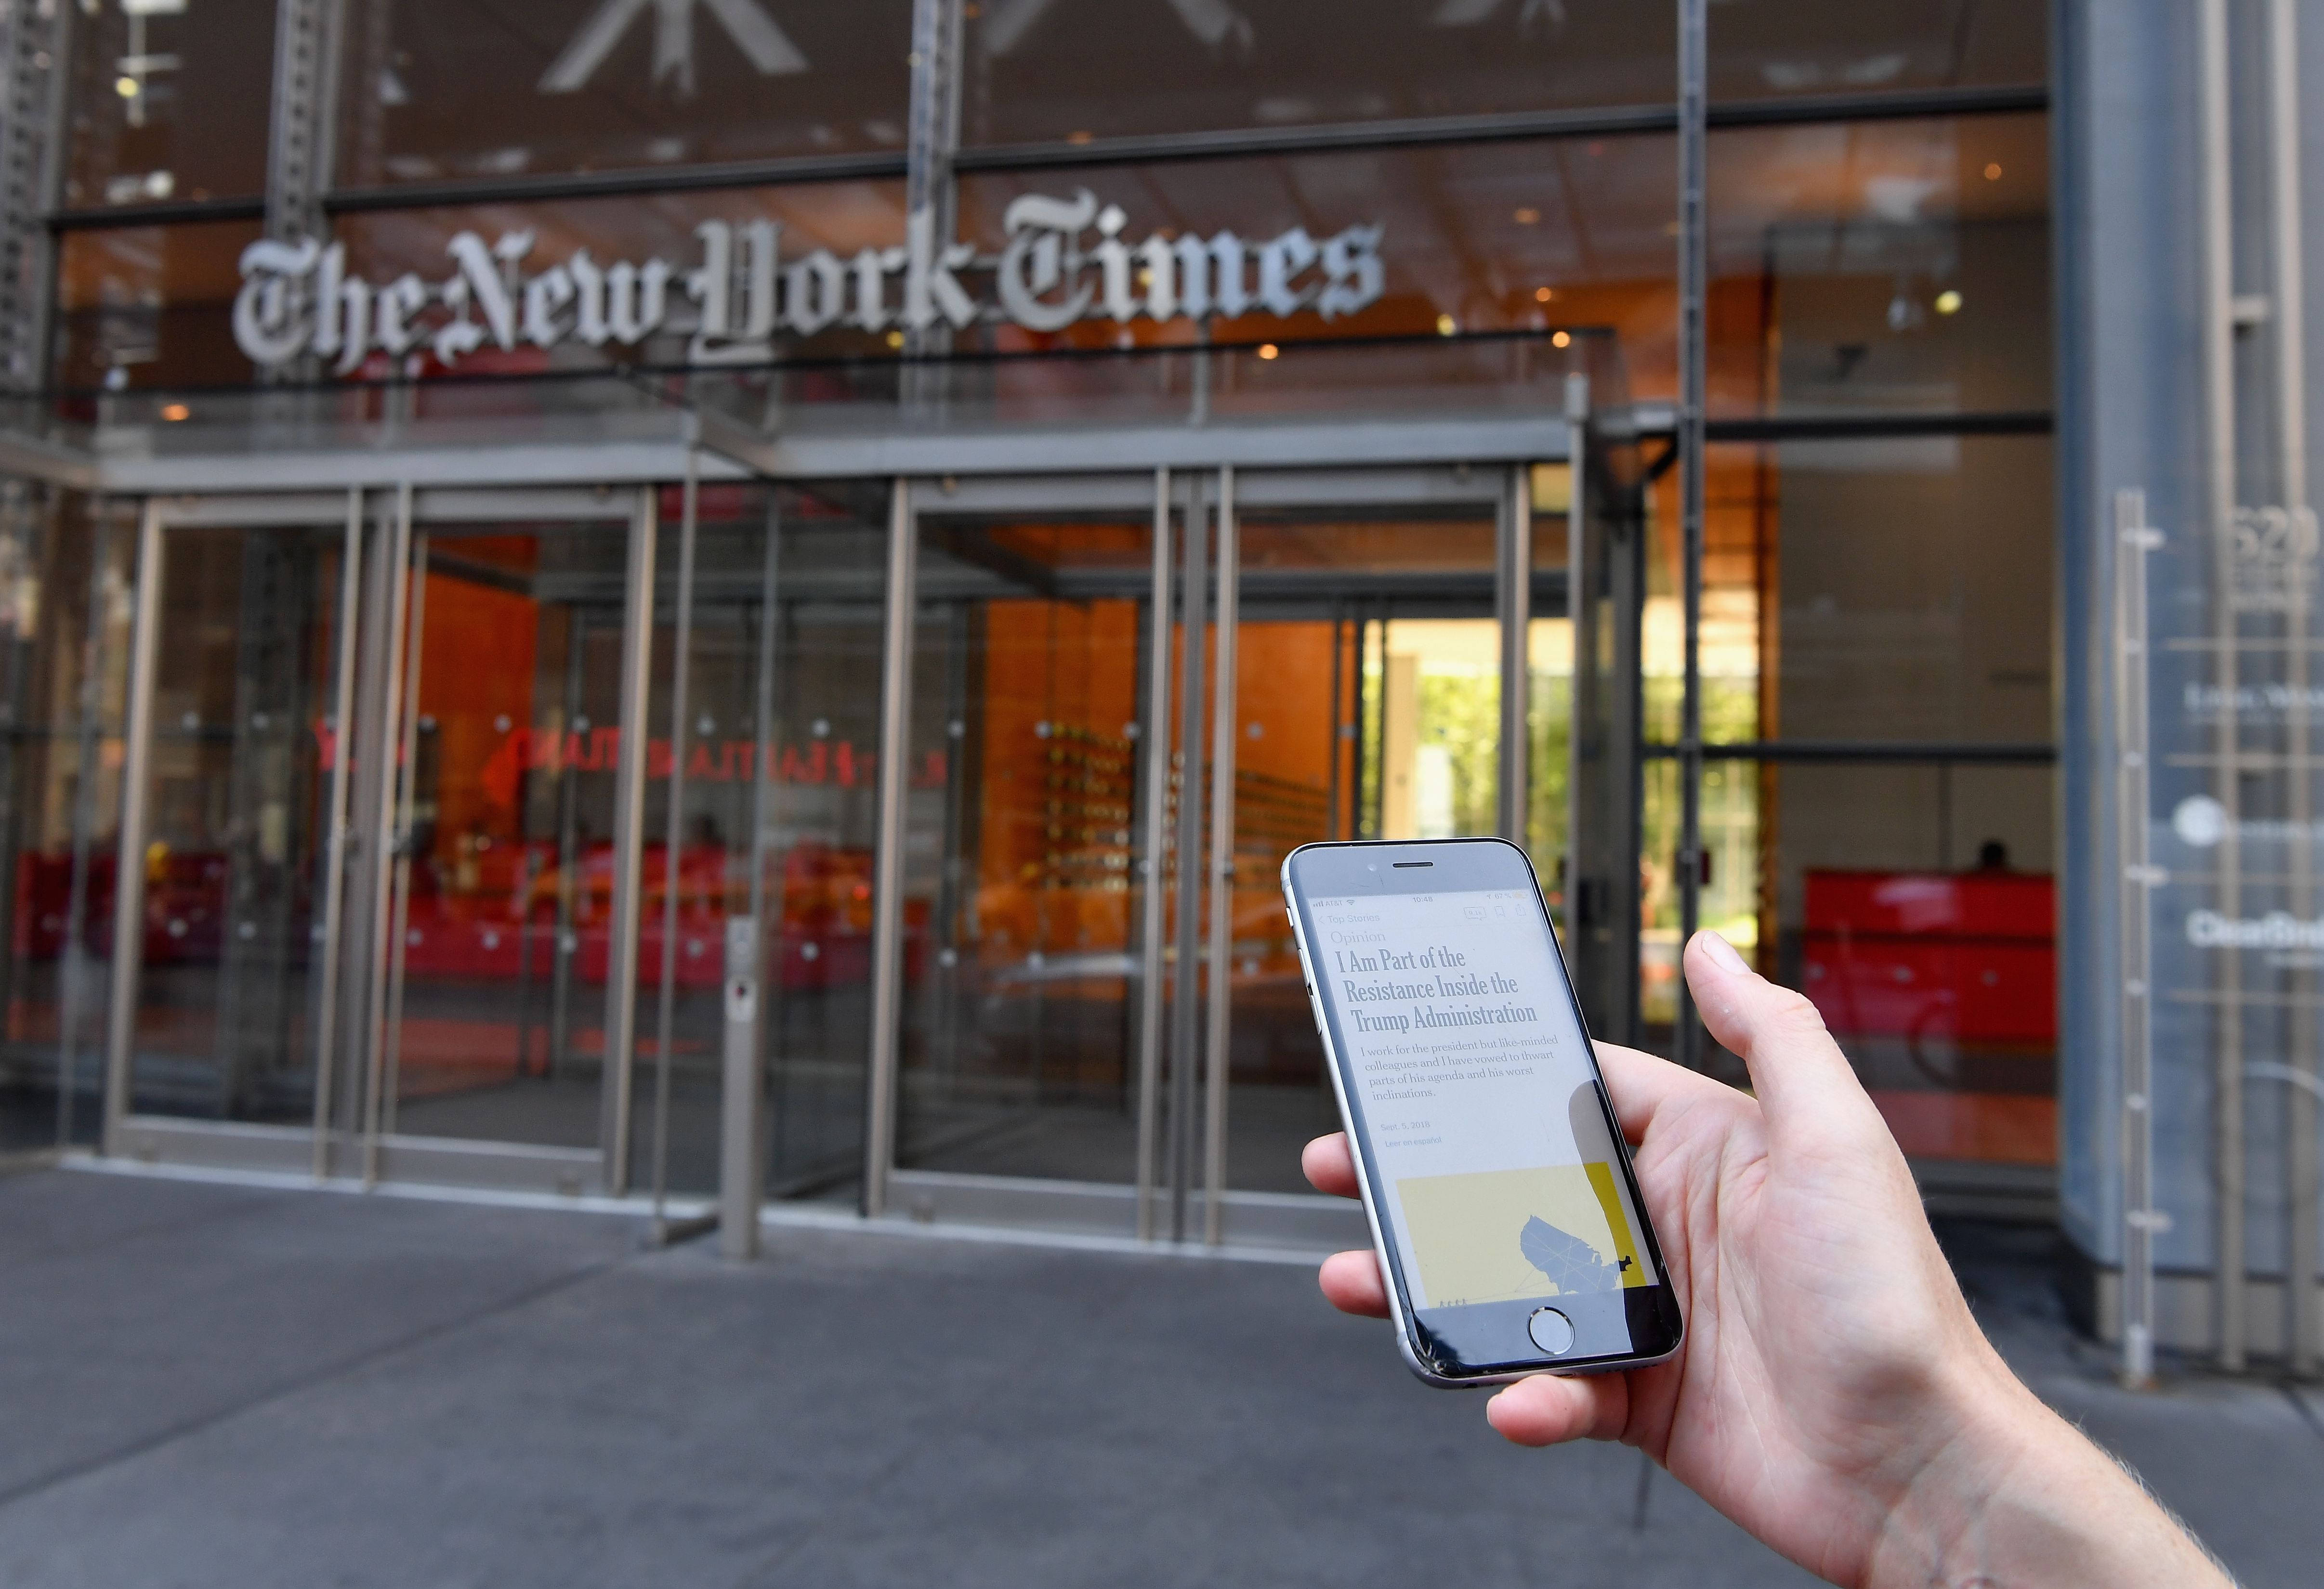 A smartphone displaying a New York Times opinion piece titled "I Am Part of the Resistance Inside the Trump Administration" is held up in this illustration in front of the New York Times building on September 6, 2018 in New York. (Photo by ANGELA WEISS / AFP/ Getty Images)